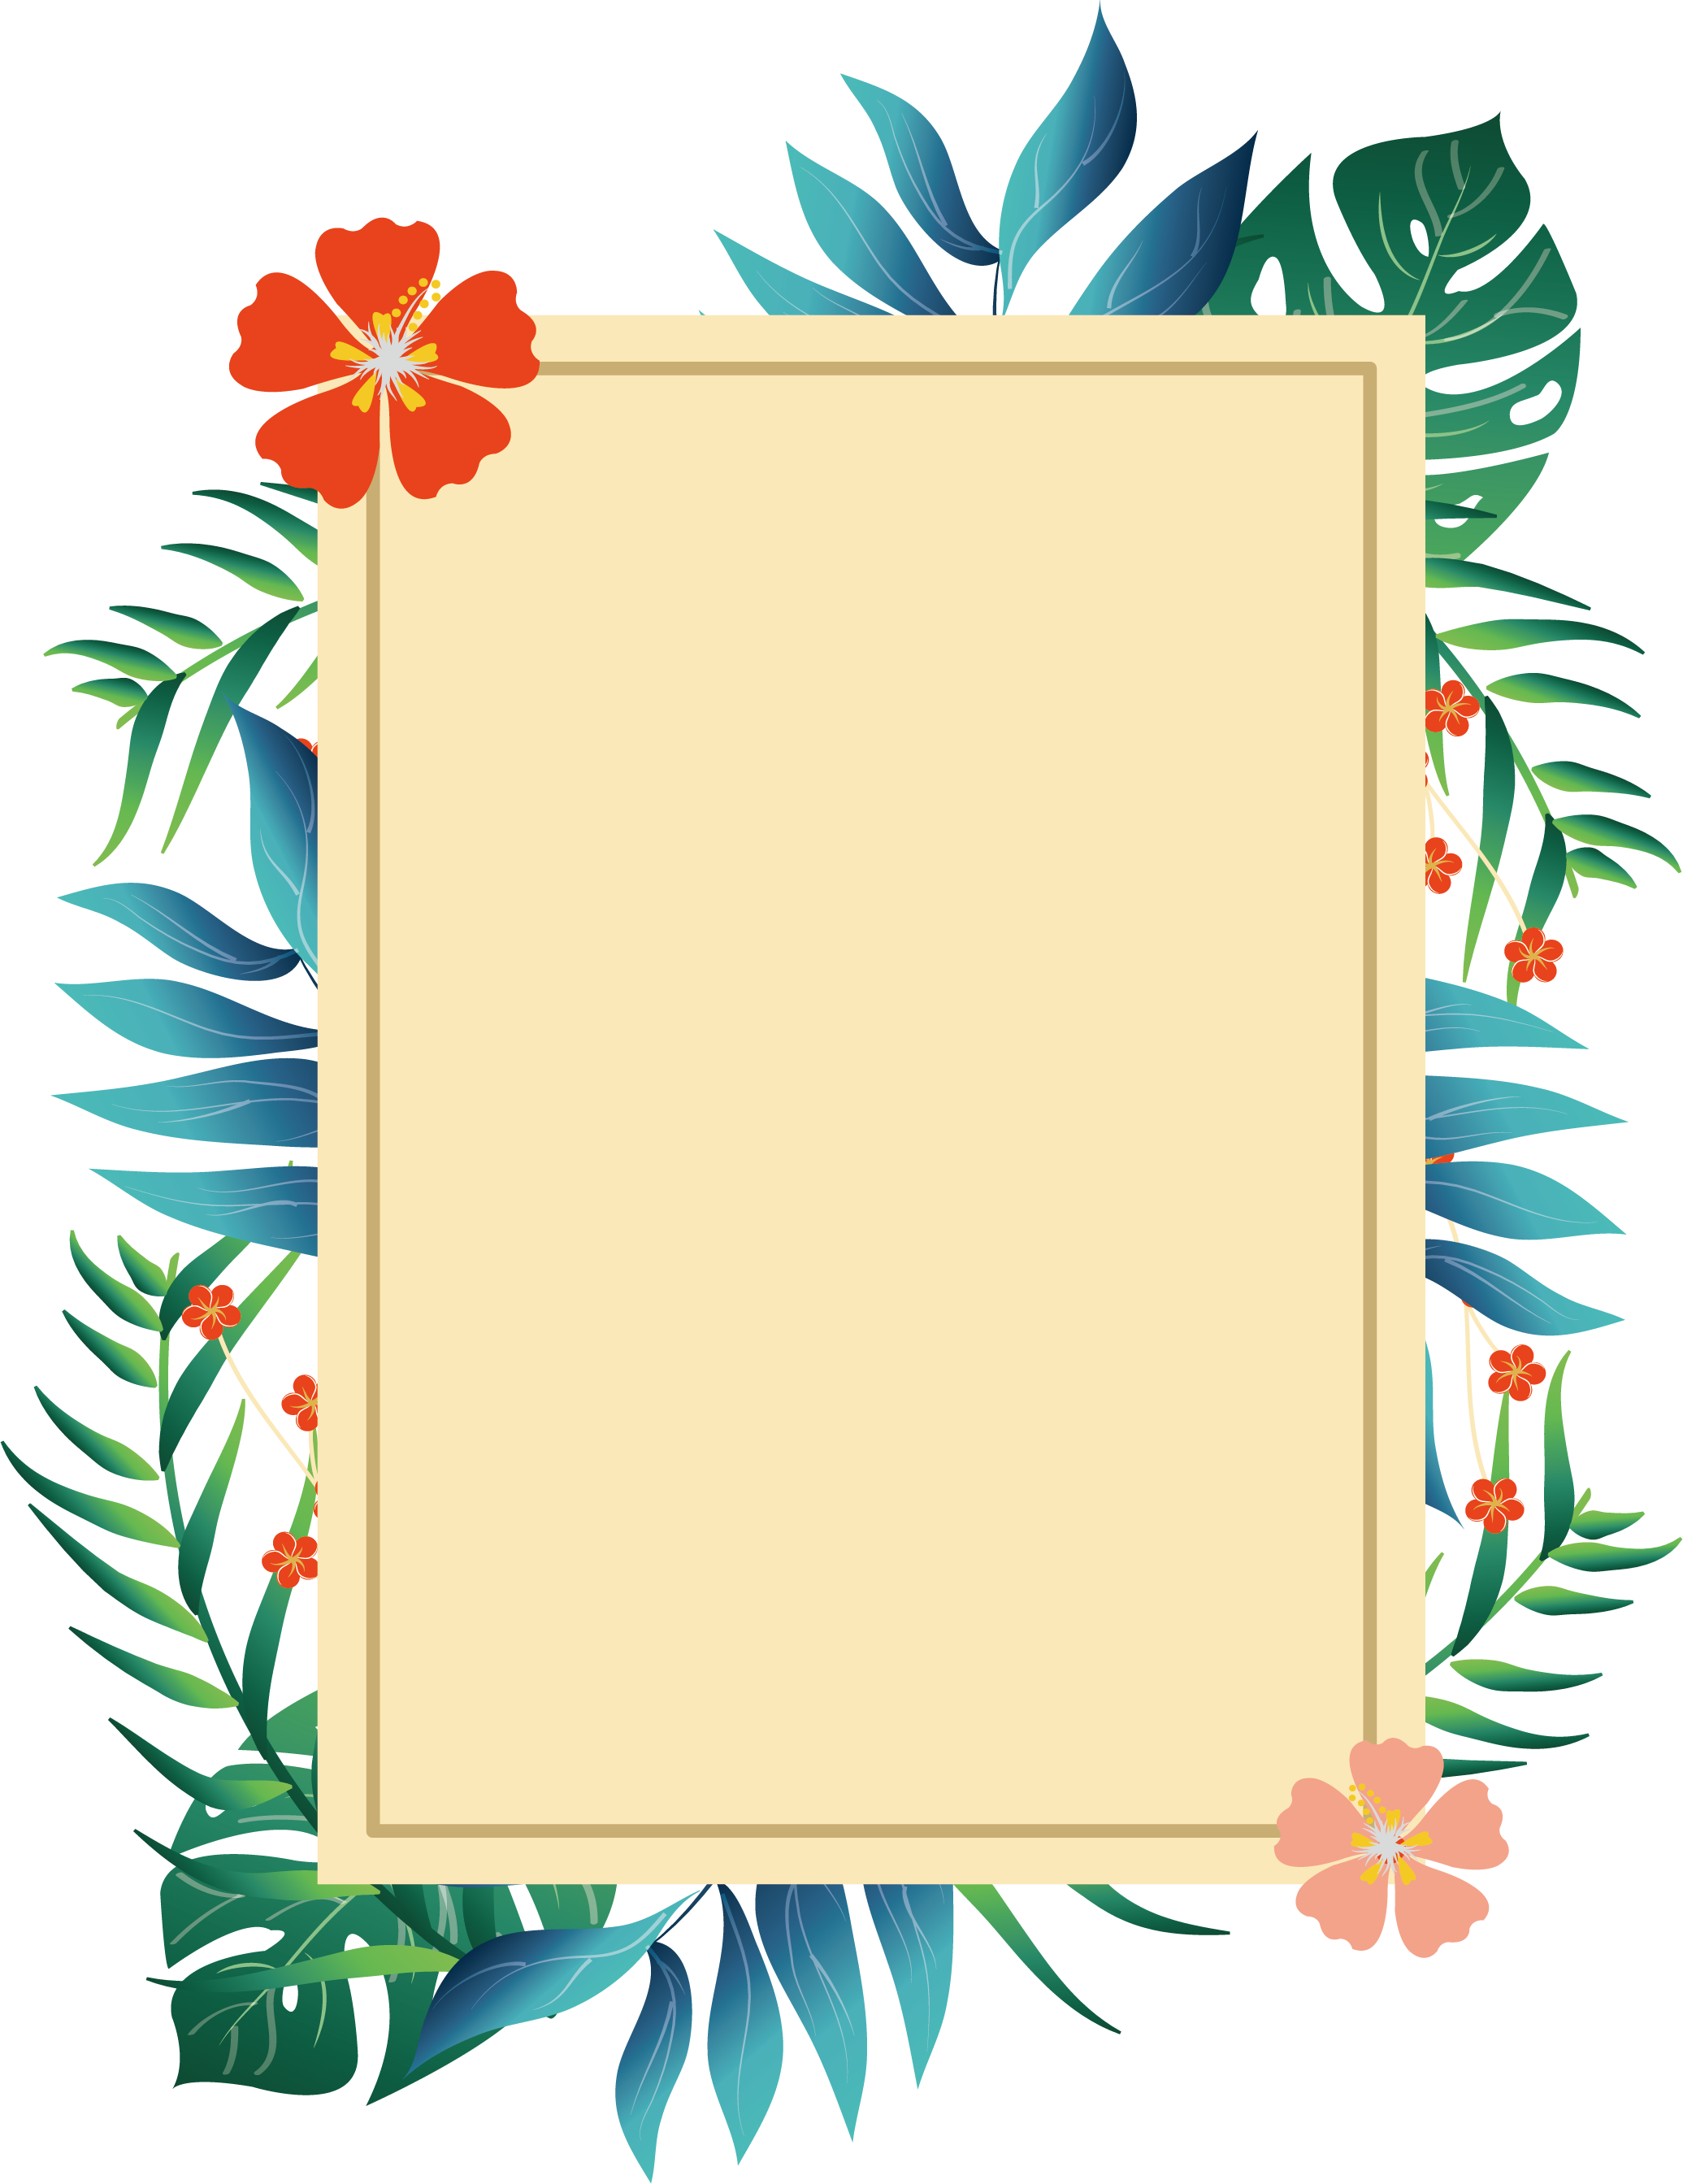 Download Picture Plant Romantic Summer Poster Frame Borders